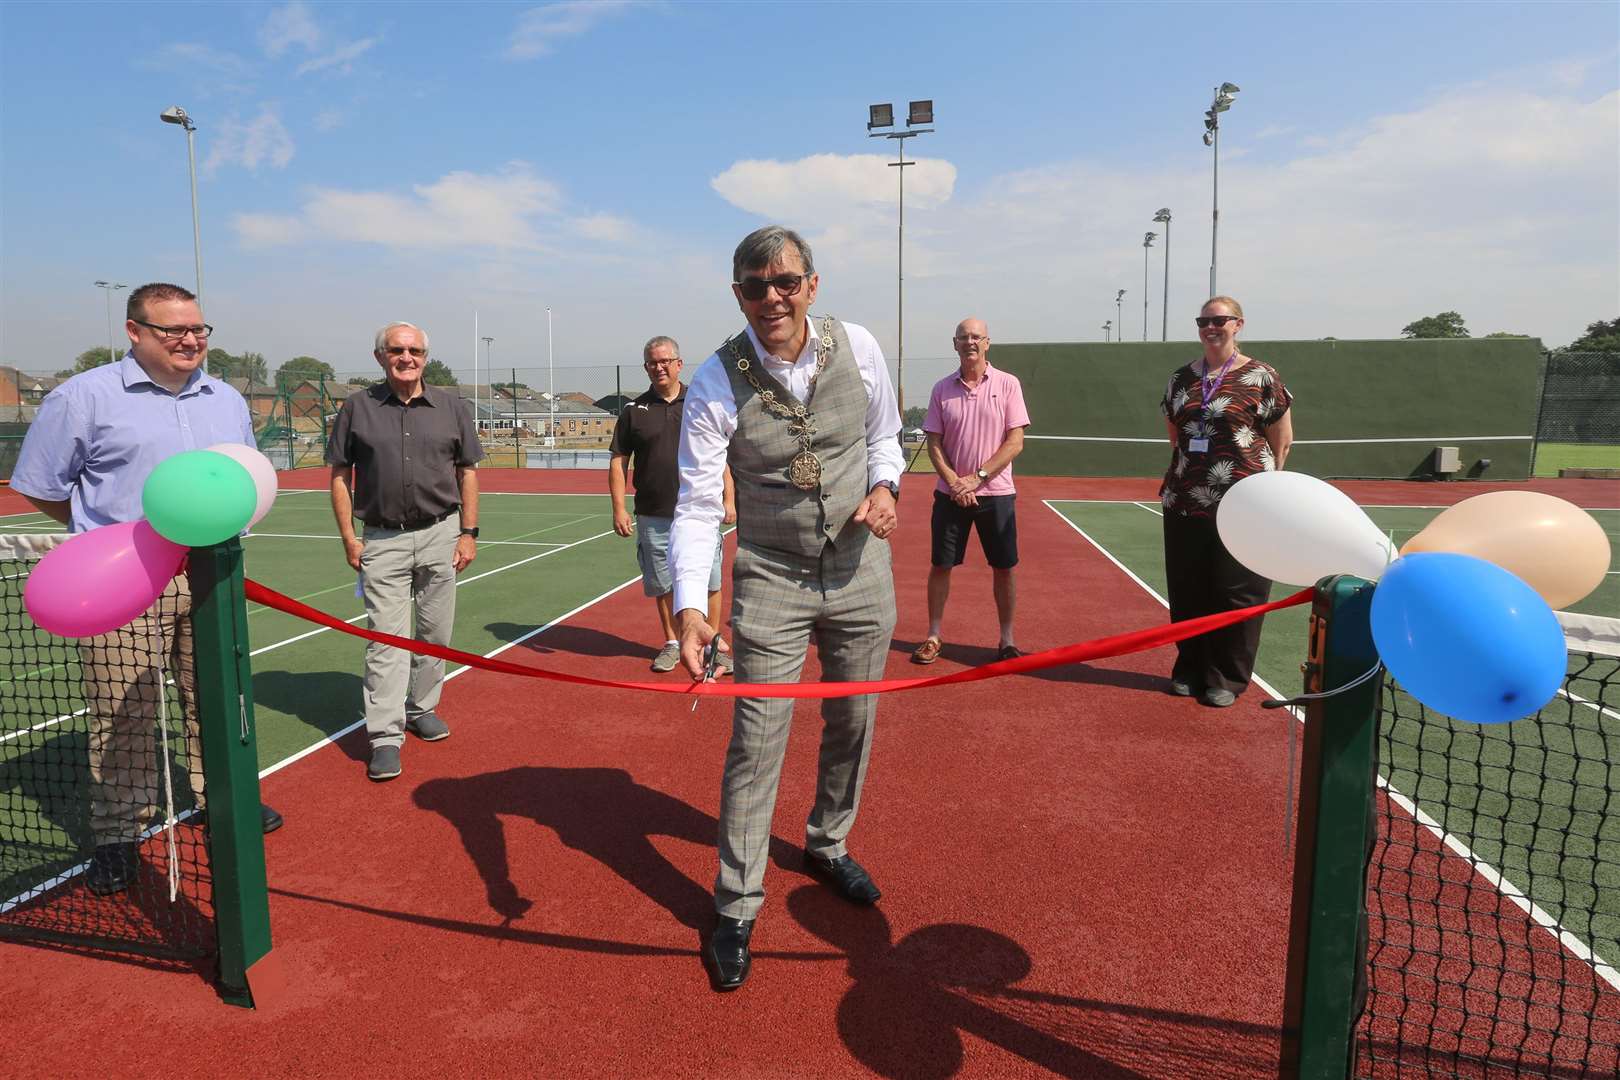 Gravesham mayor Cllr John Caller opened the new courts at Gravesham Tennis Club last month. Picture: Rob Powell